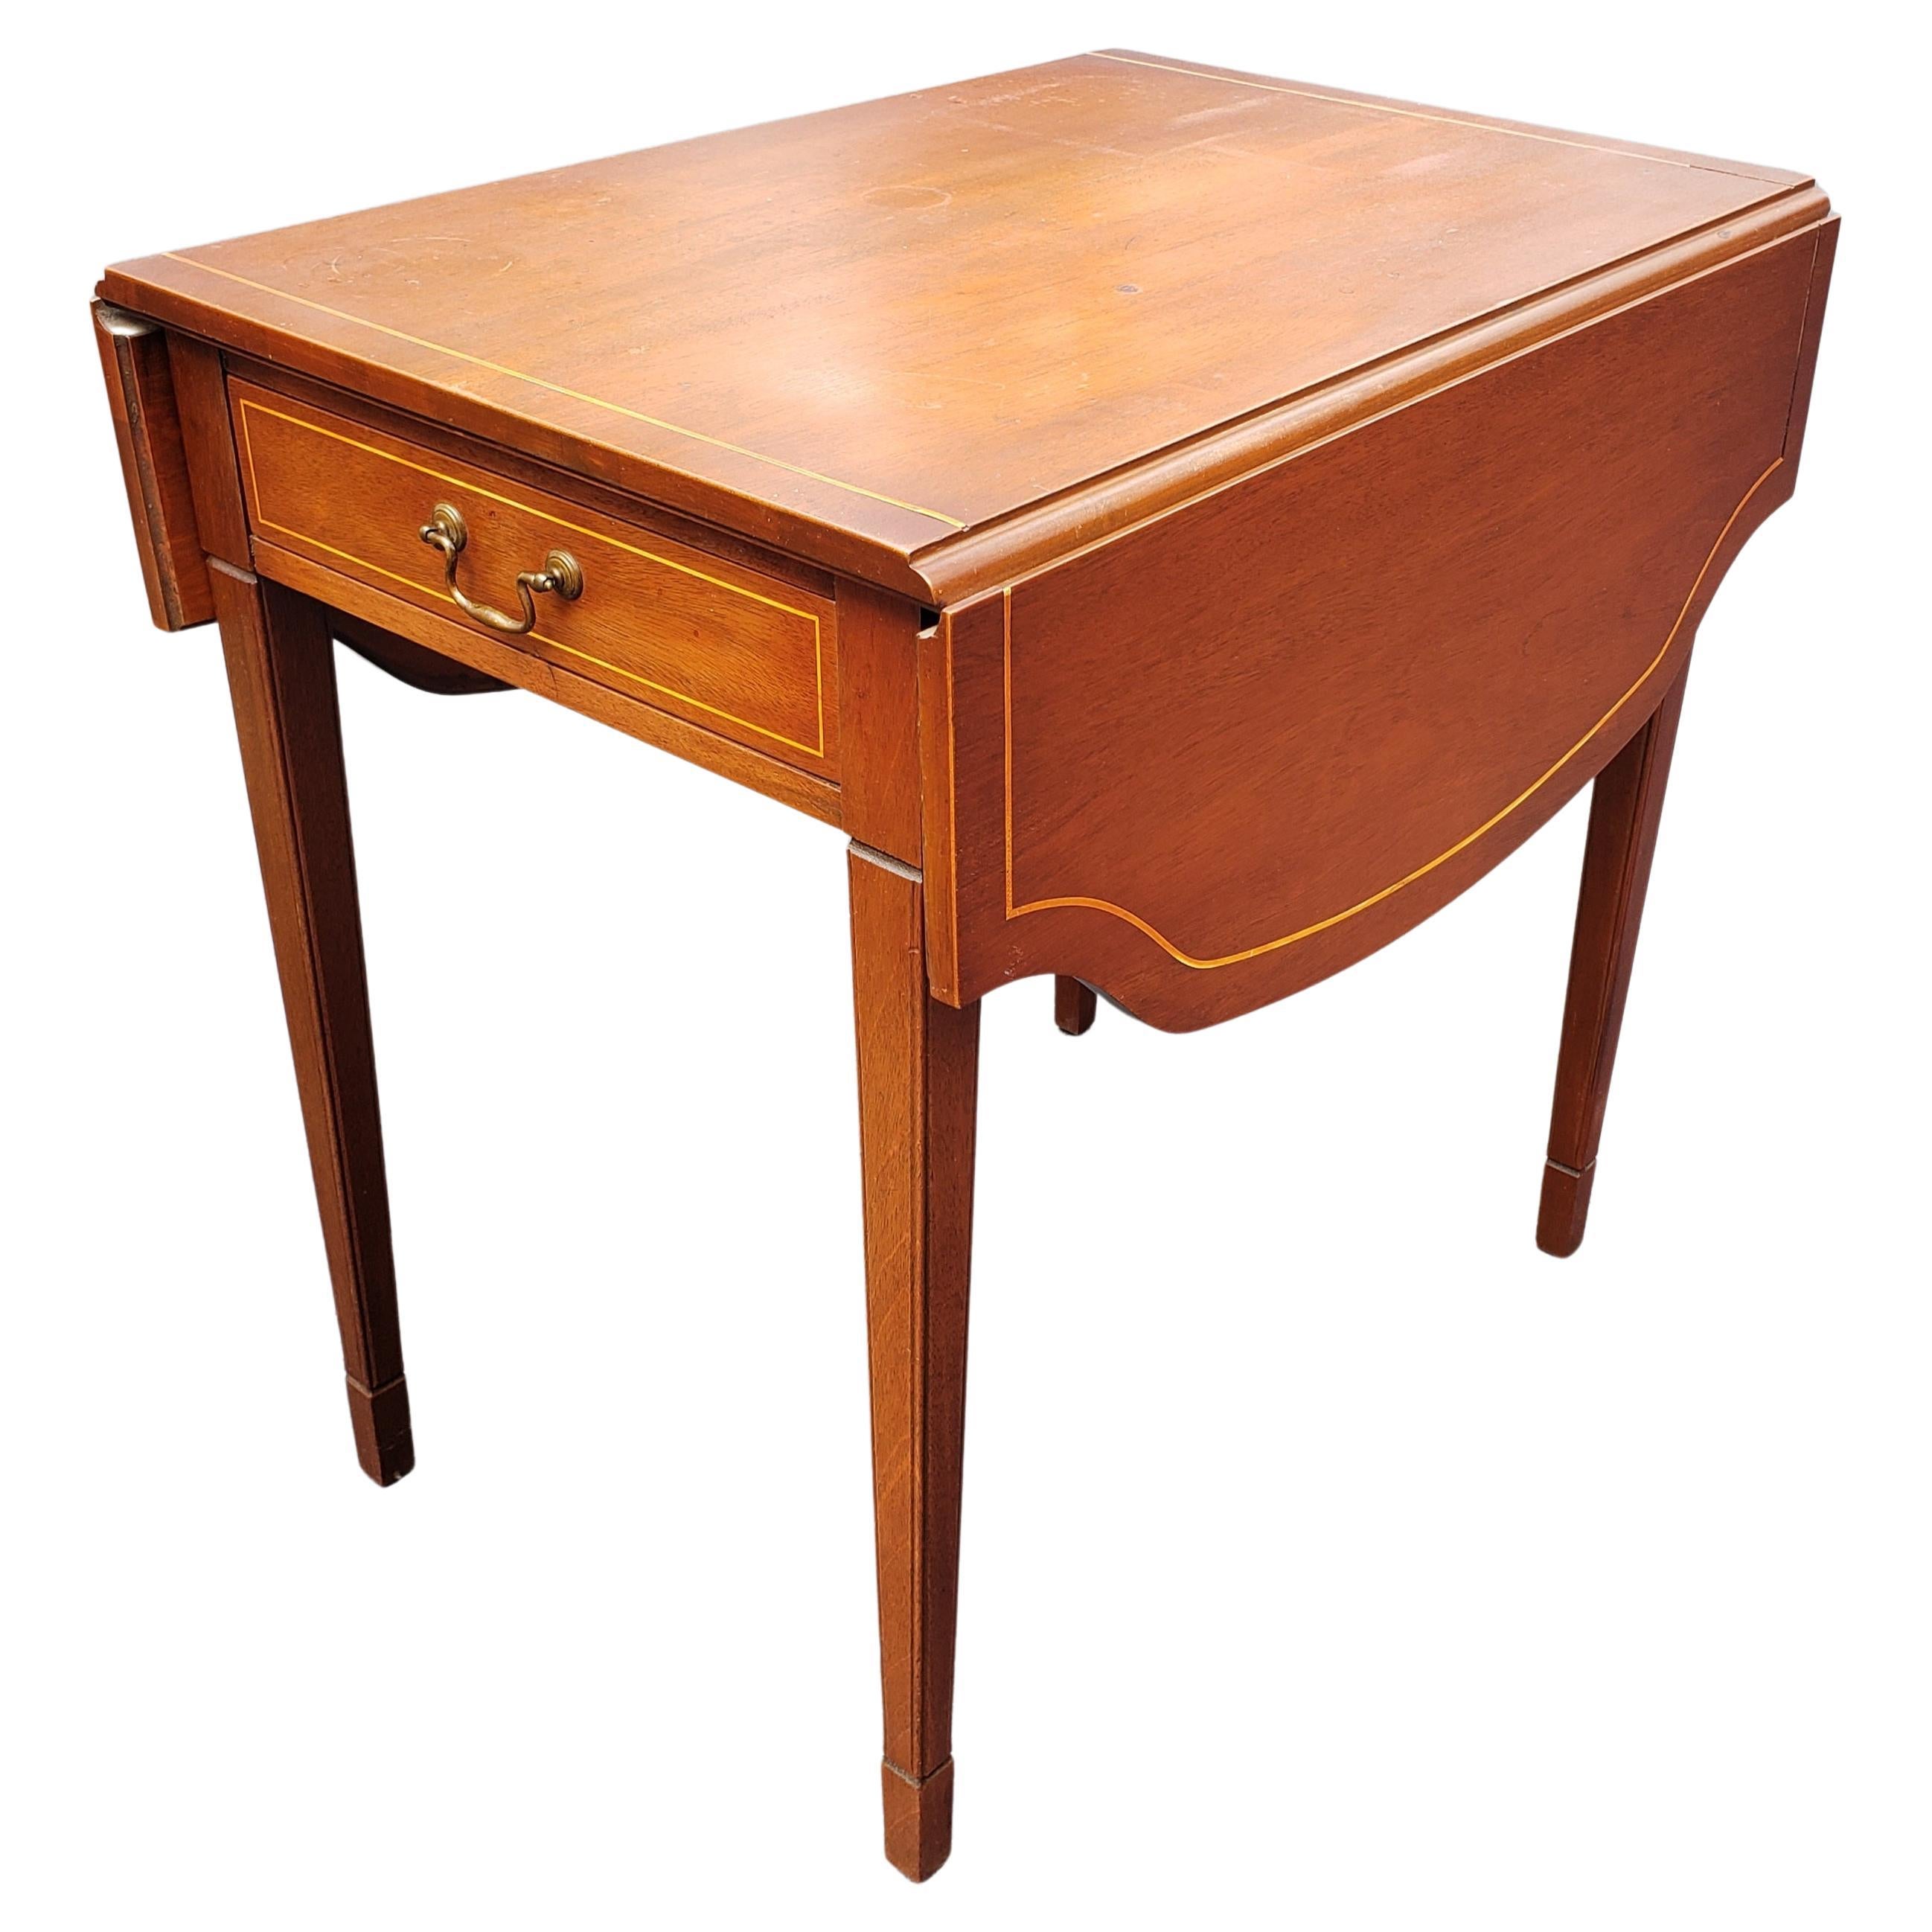 20th Century Brandt Certified Genuine Mahogany Pembroke Drop-Leaf Tables, a Pair, circa 1940s For Sale